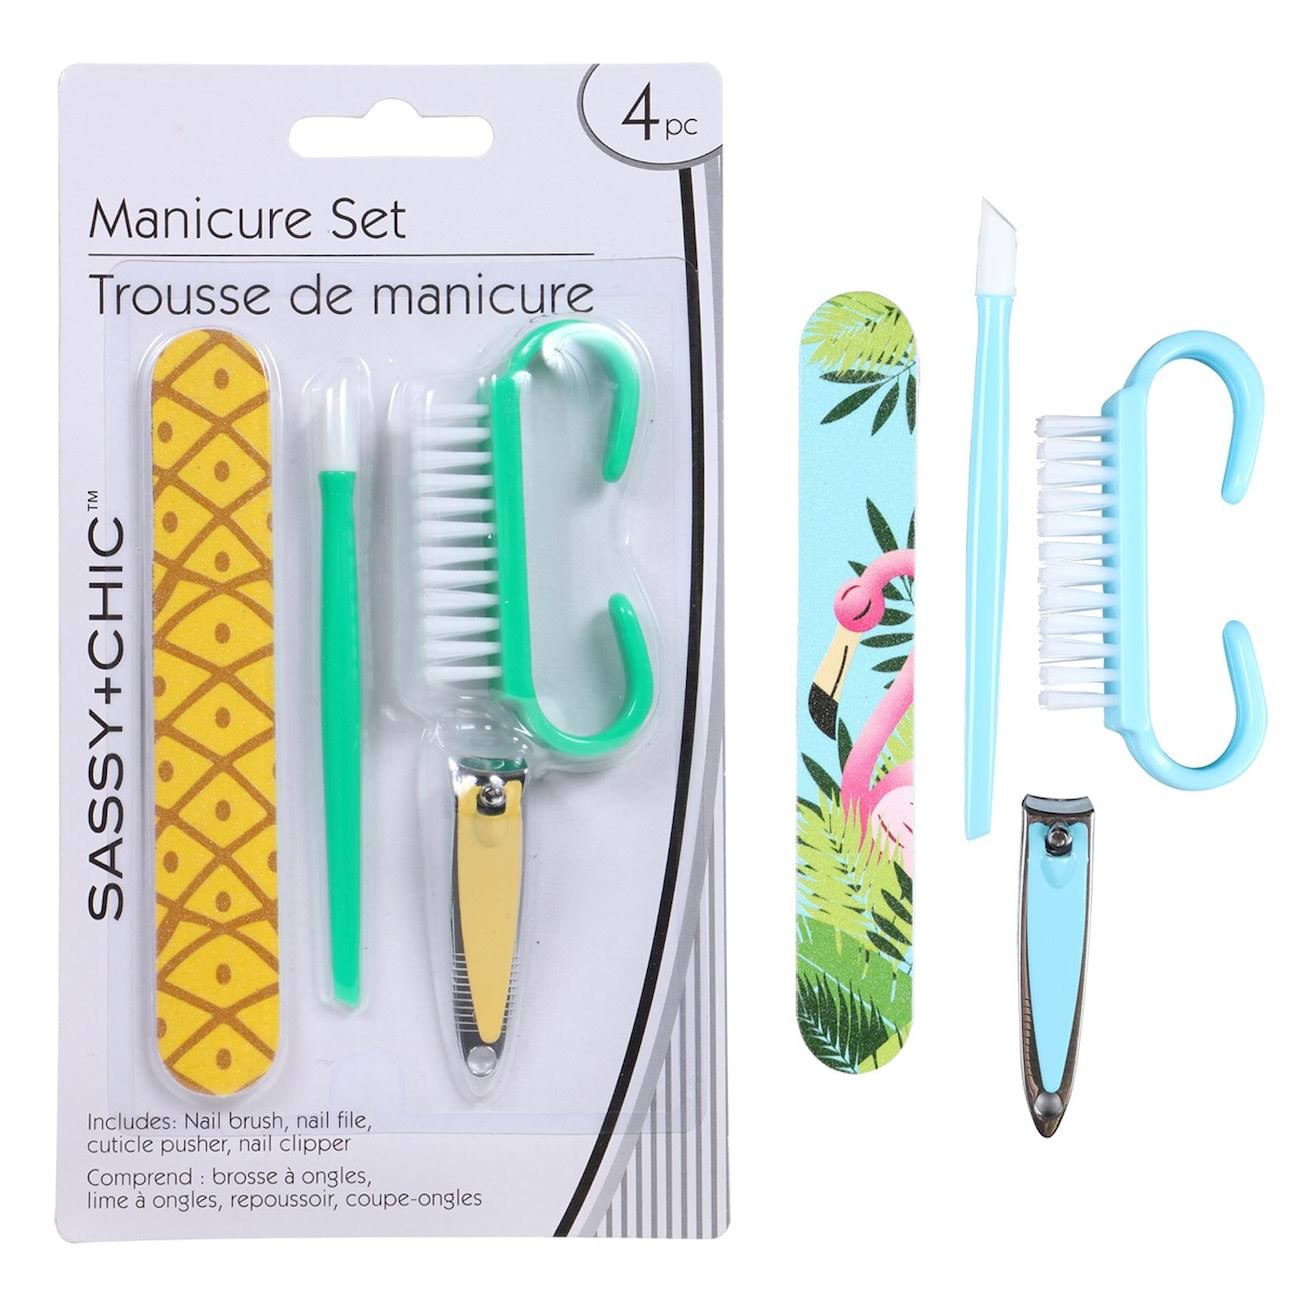 24 Sassy+Chic Tropical-Themed 4-pc. Manicure Sets at Dollar Tree